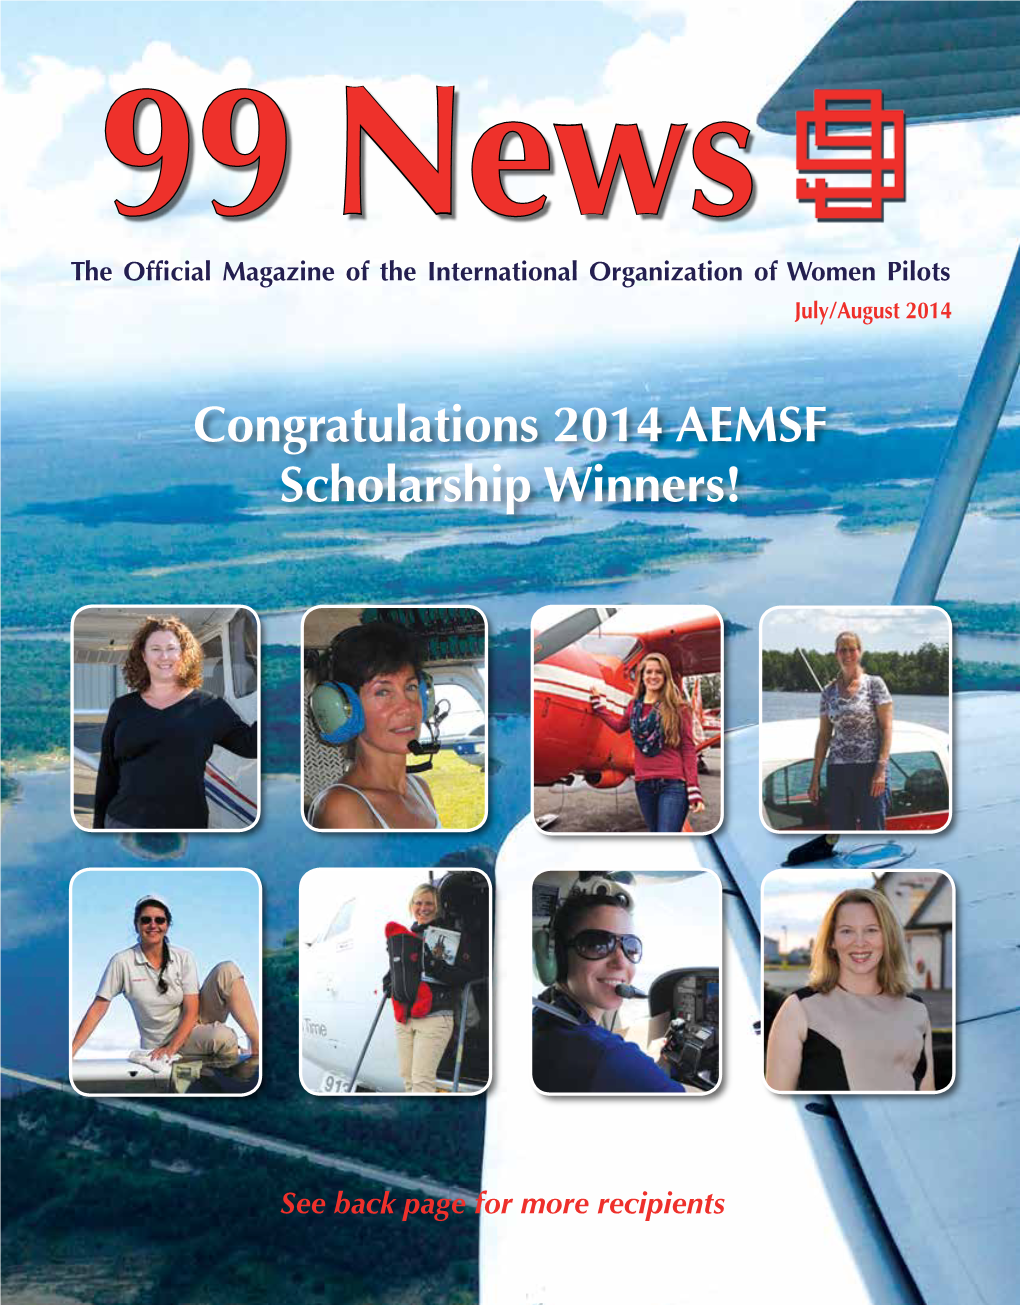 99 News the Official Magazine of the International Organization of Women Pilots July/August 2014